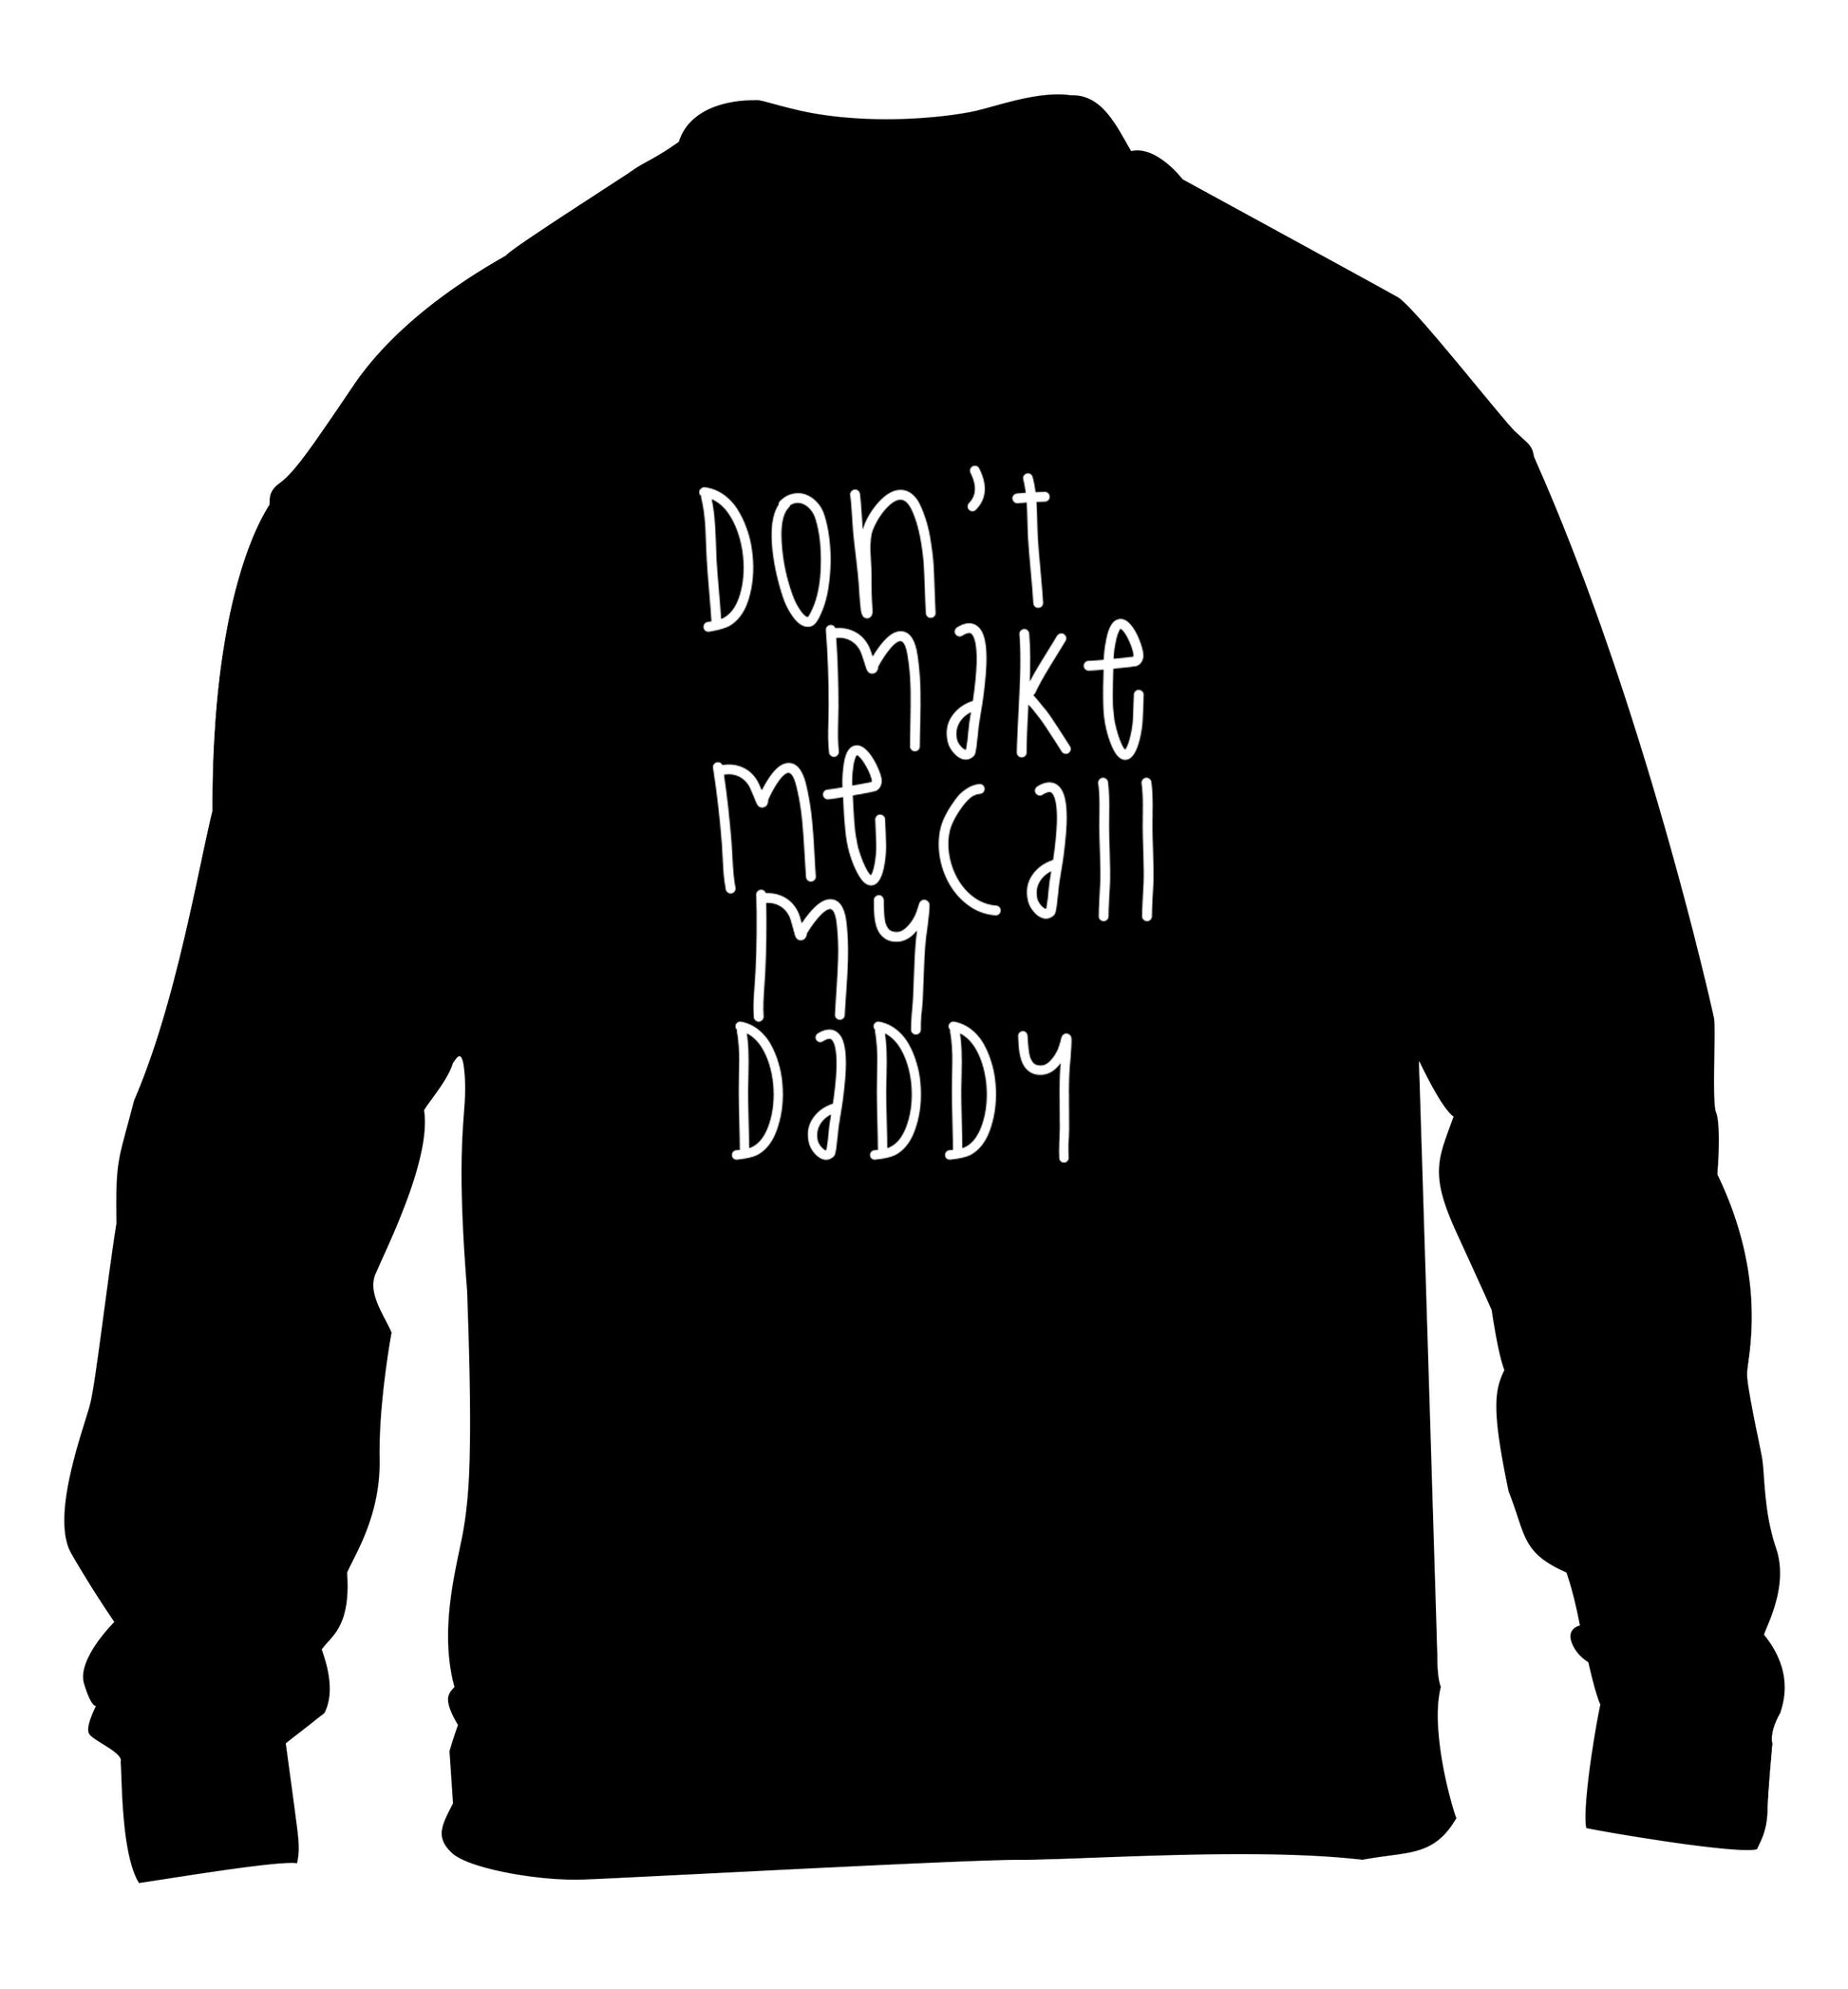 Don't make me call my daddy children's black sweater 12-14 Years